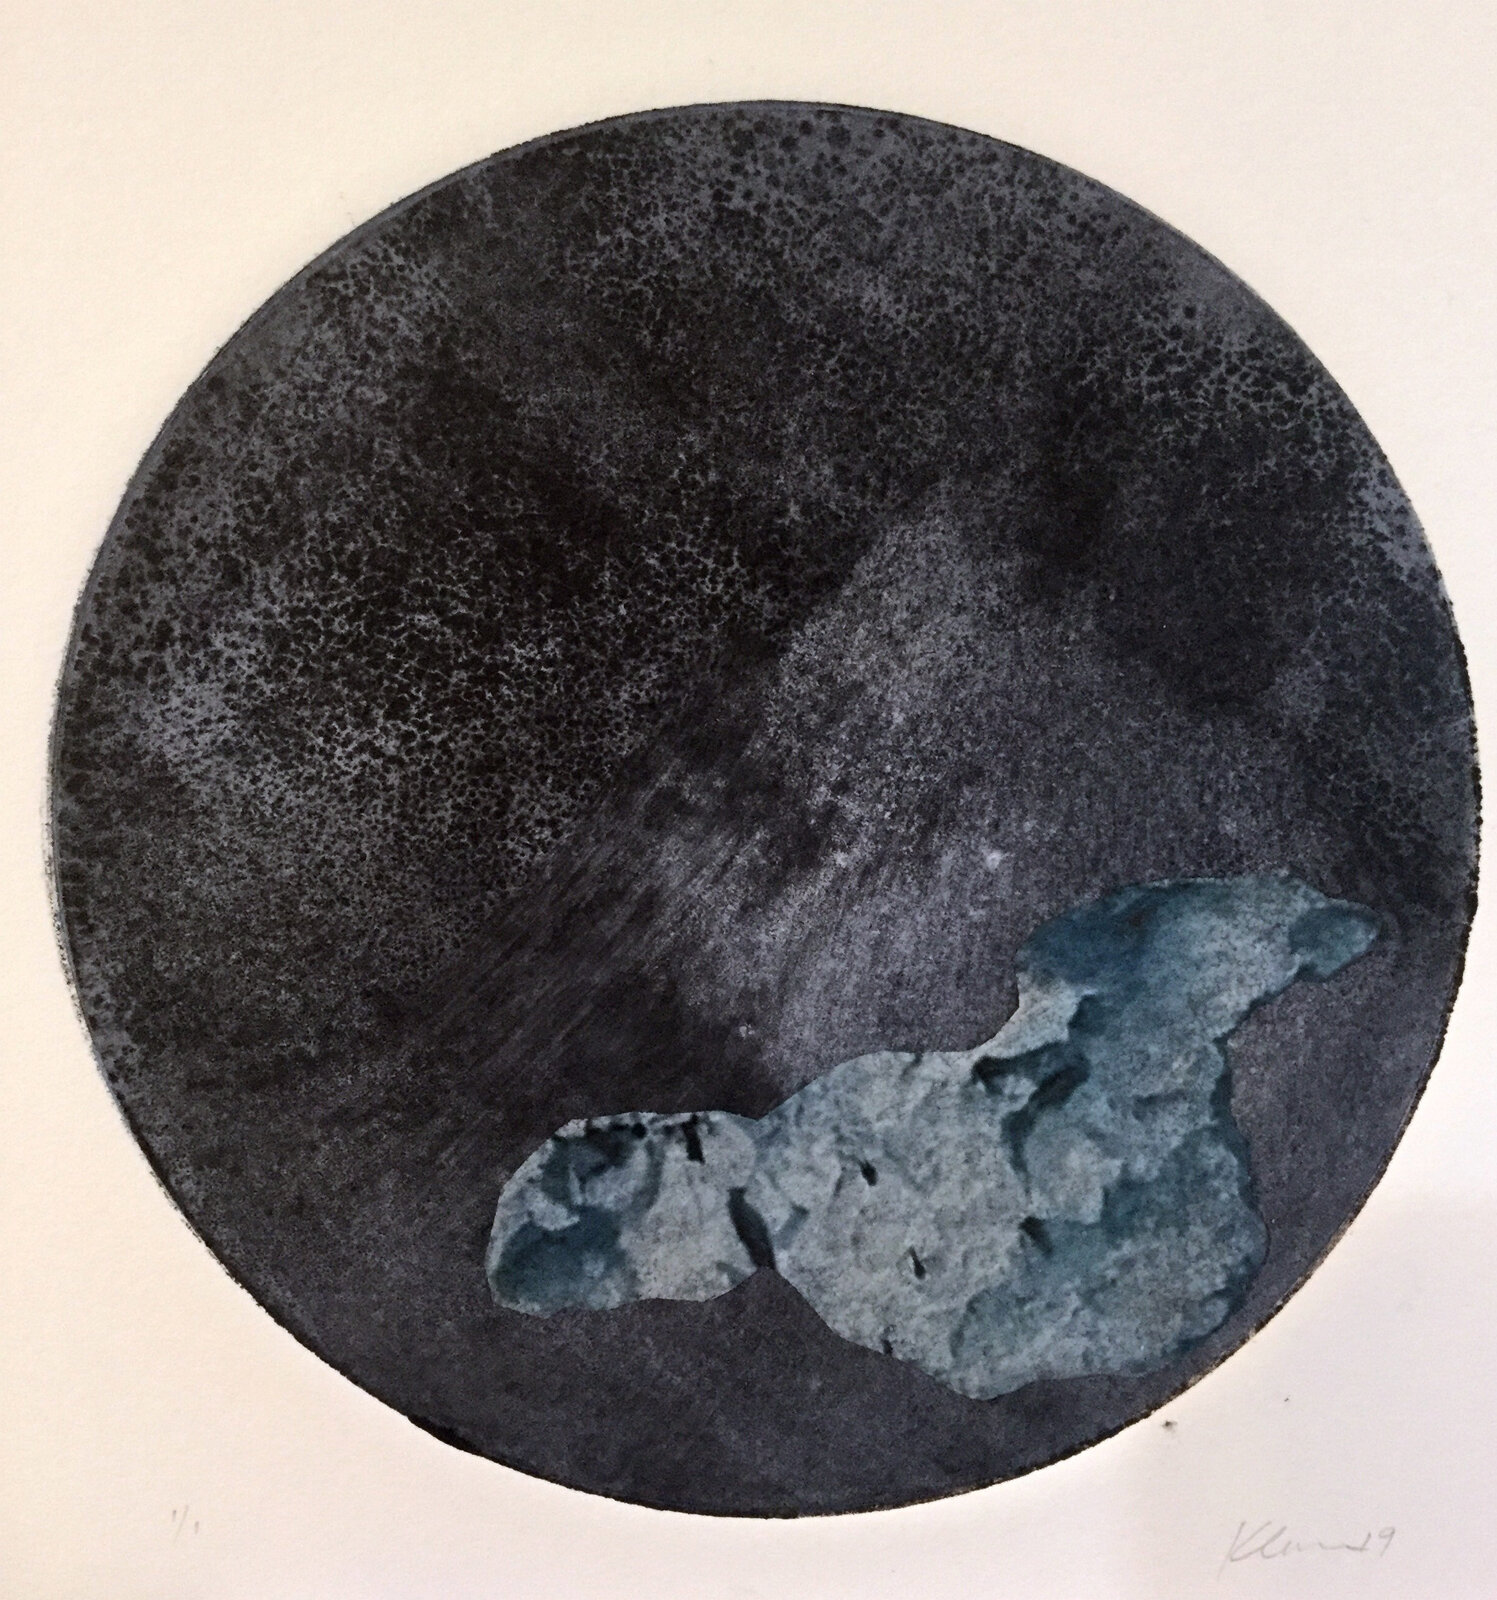    Asteroid    monotype, chine colle, 8 inches 